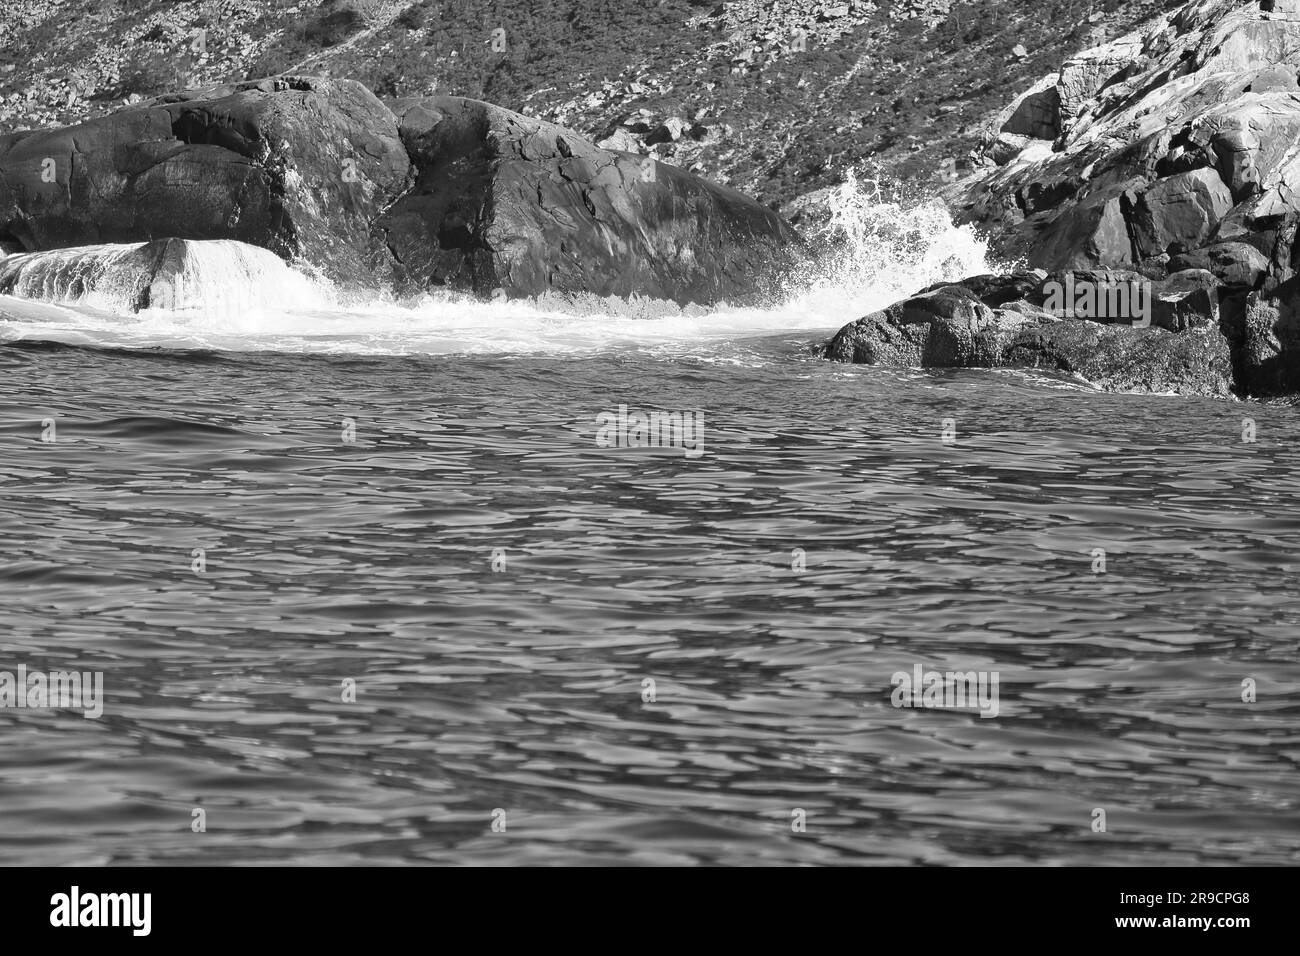 Norway on the fjord, spray on rocks in black and white. Water splashing on the rocks. Coastal landscape in Scandinavia. Landscape photo from the north Stock Photo